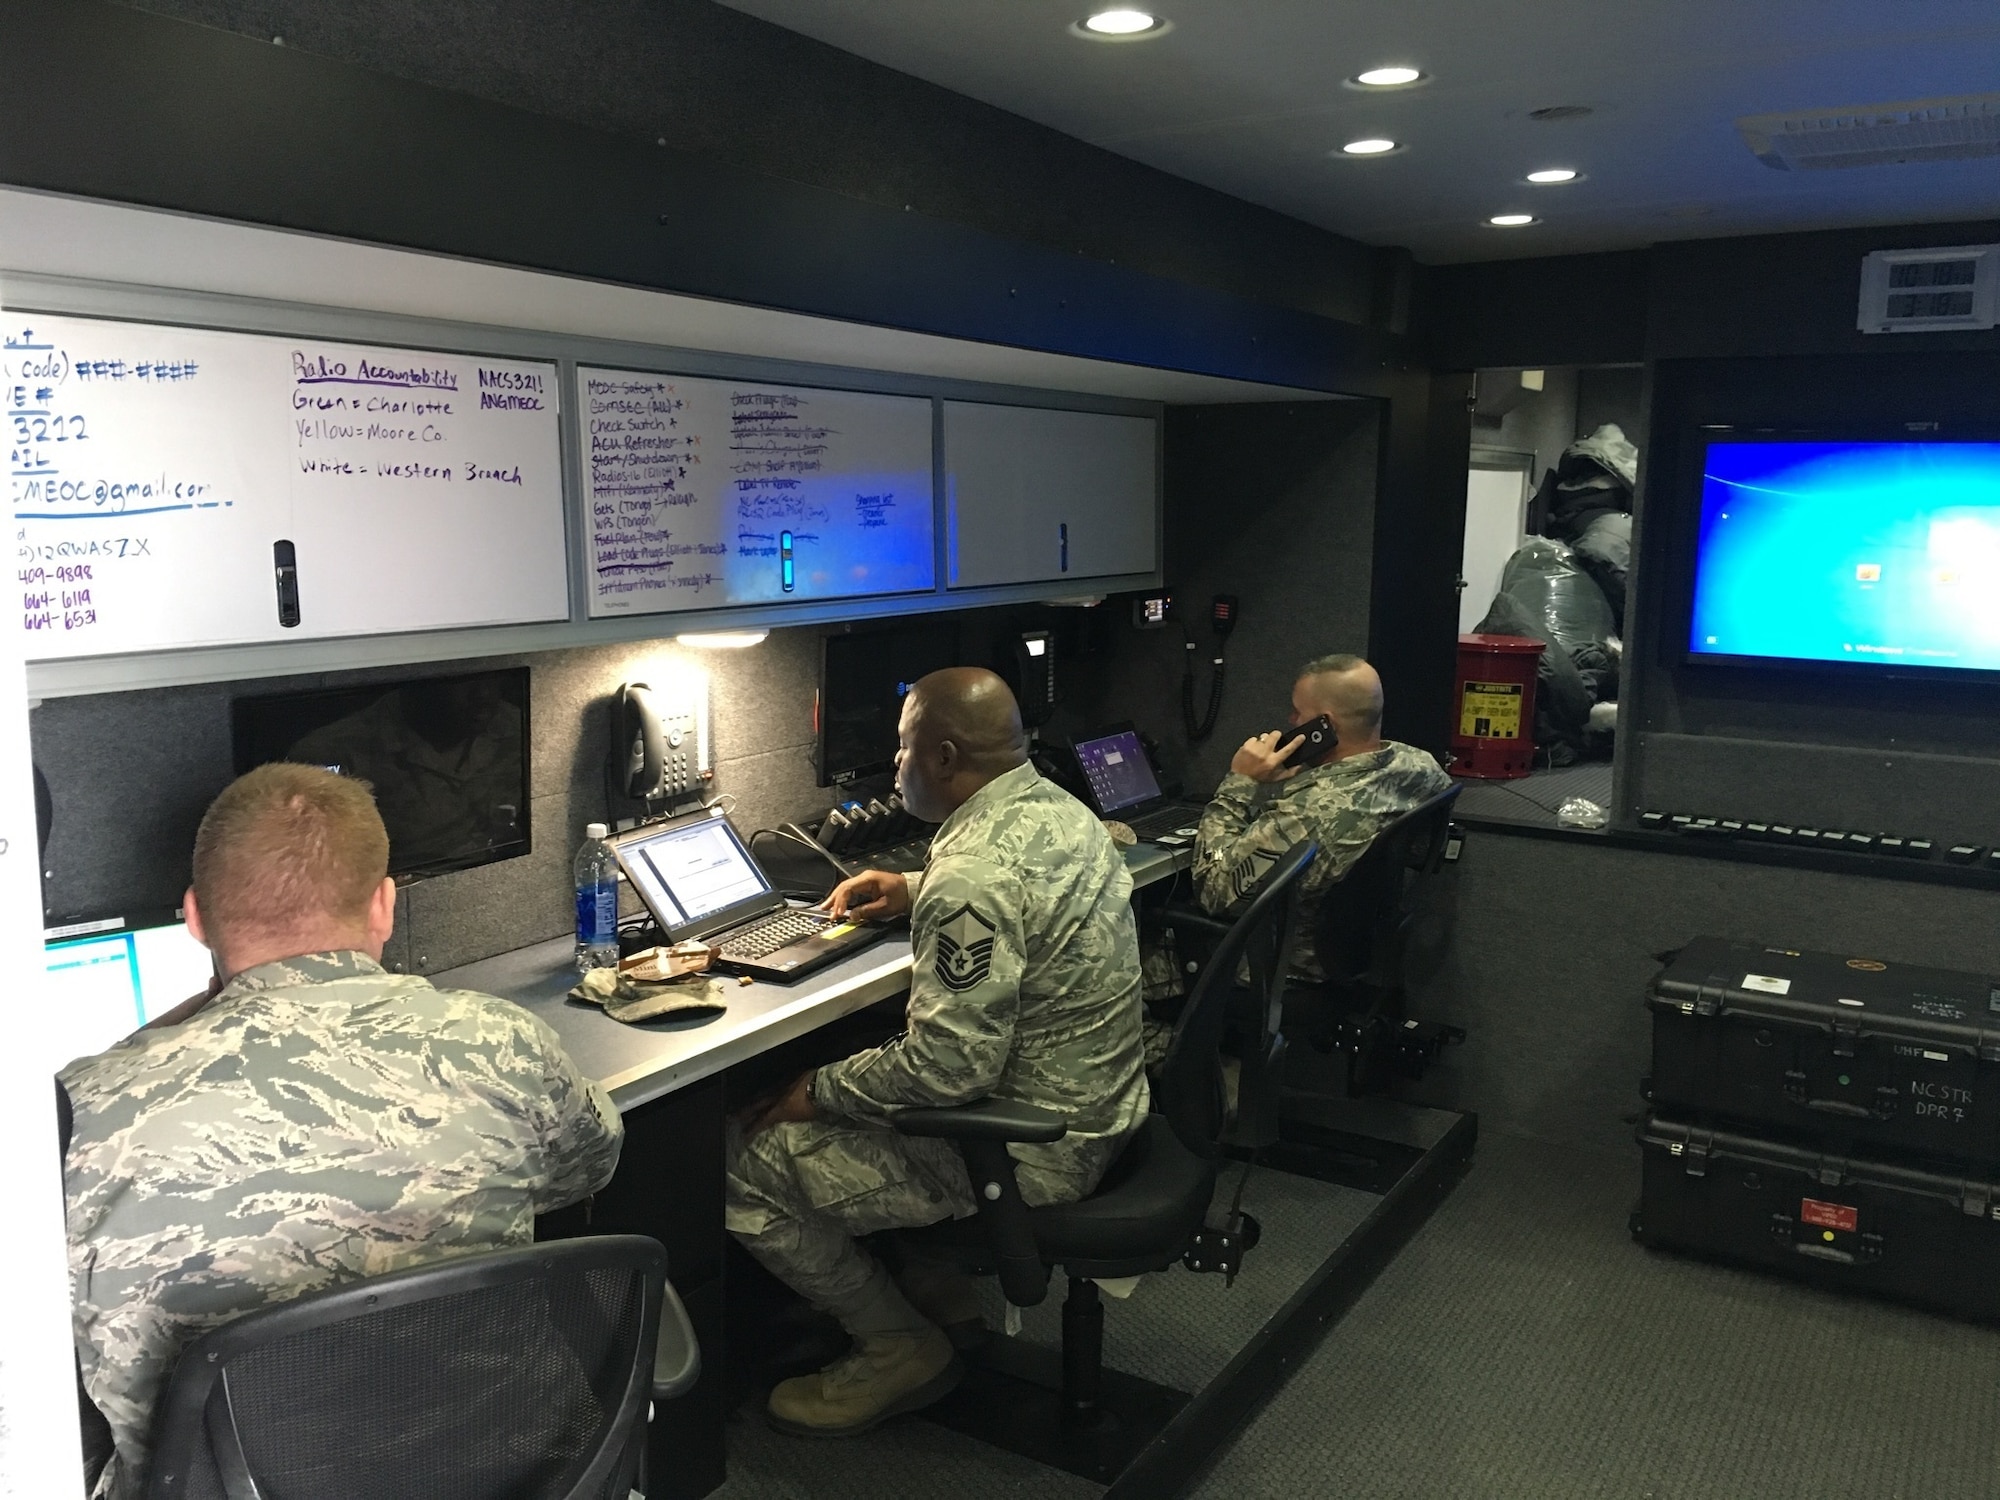 The North Carolina Air National Guard Mobile Emergency Operations Center (MEOC) team works diligently to provide backup communications to three tactical operations centers Task Force Security, Task Force Crowd, and Task Force Access, in Washington D.C., Jan. 19, 2017. The team consists of National Guard Airmen Master Sg.t Rebecca Tongen, Staff Sgt. Mark Fow, Senior Master Sgt. James Cutshaw, Master Sgt. Timothy Jones, Staff Sergeant Benjamin Elliot, Brigadier Gen. Staudenraus, and Master Sgt. Erik Kennedy. About 8000 soldiers and airmen are tasked to support the 58th United States presidential inauguration on Jan. 20, 2017. (U.S. Air National Guard photo credited to Master Sgt. Rebecca S. Tongen)